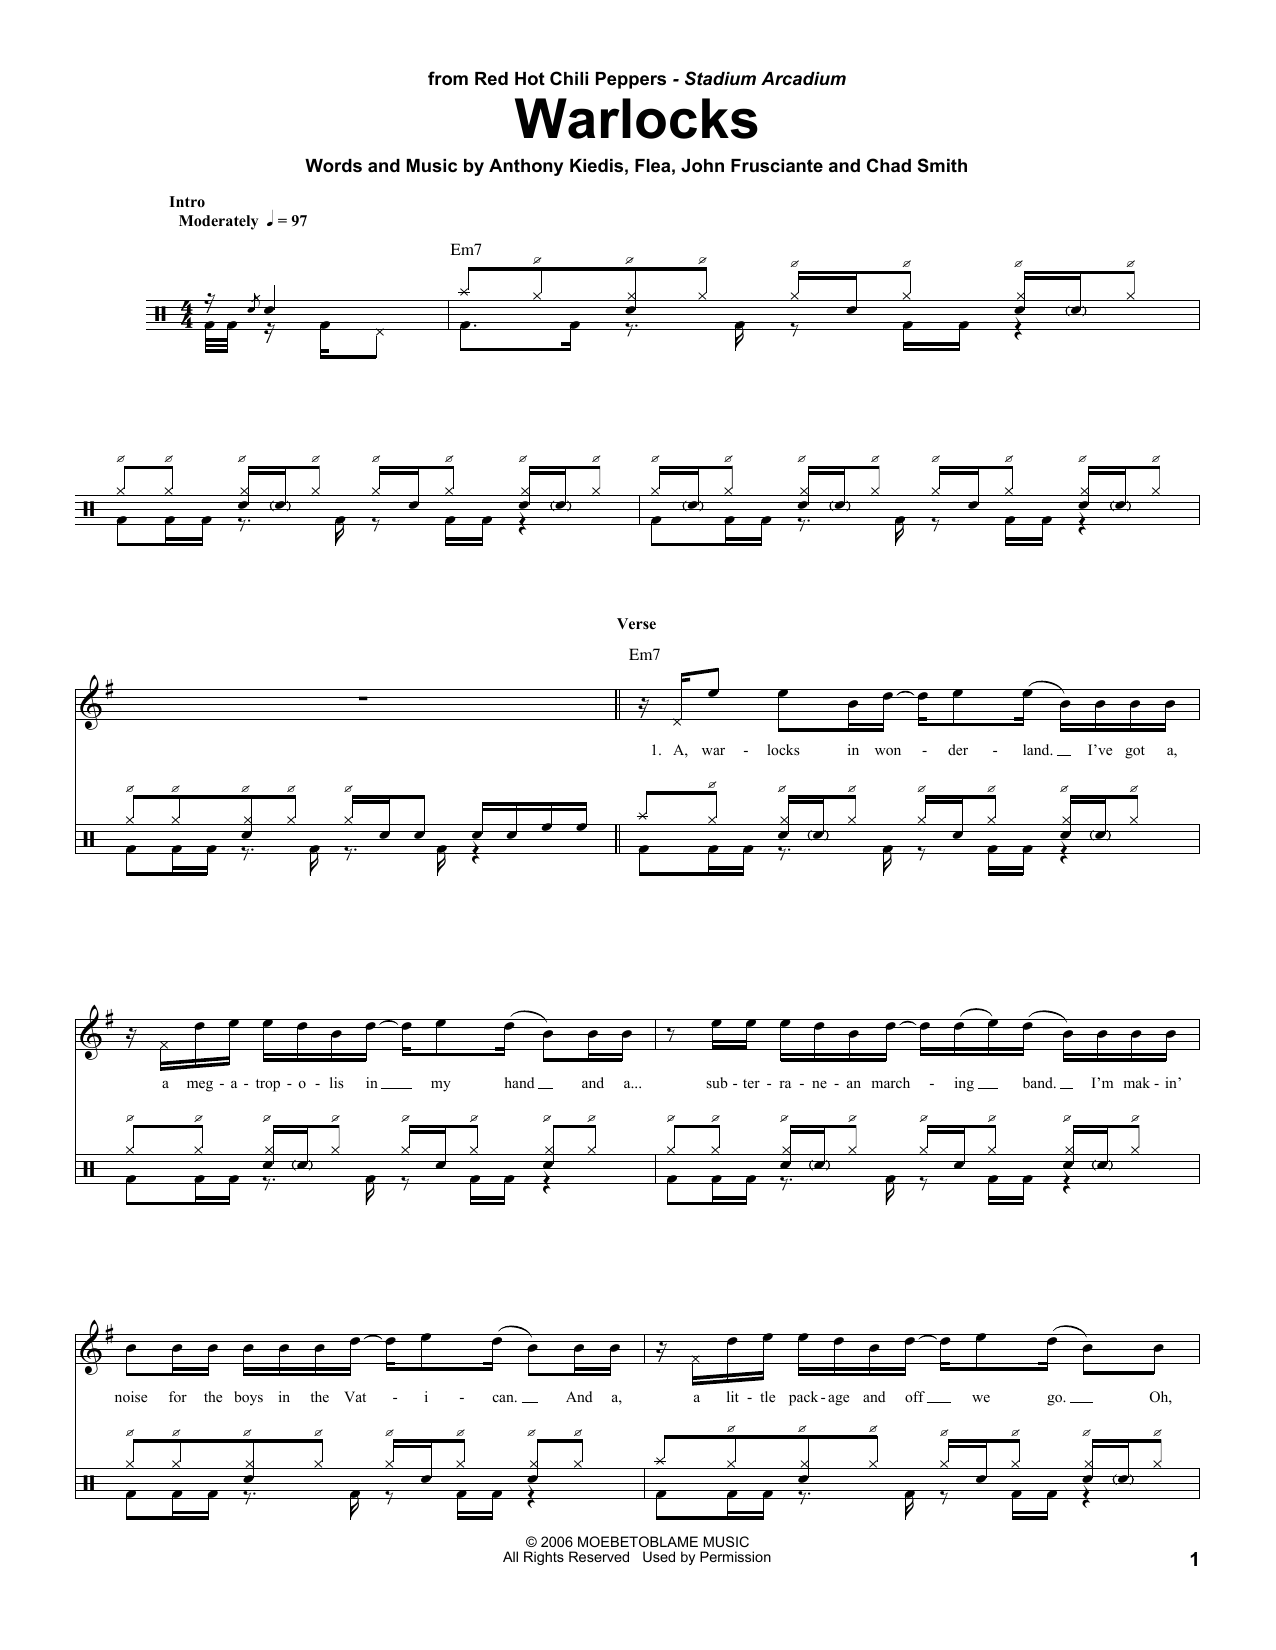 Download Red Hot Chili Peppers Warlocks Sheet Music